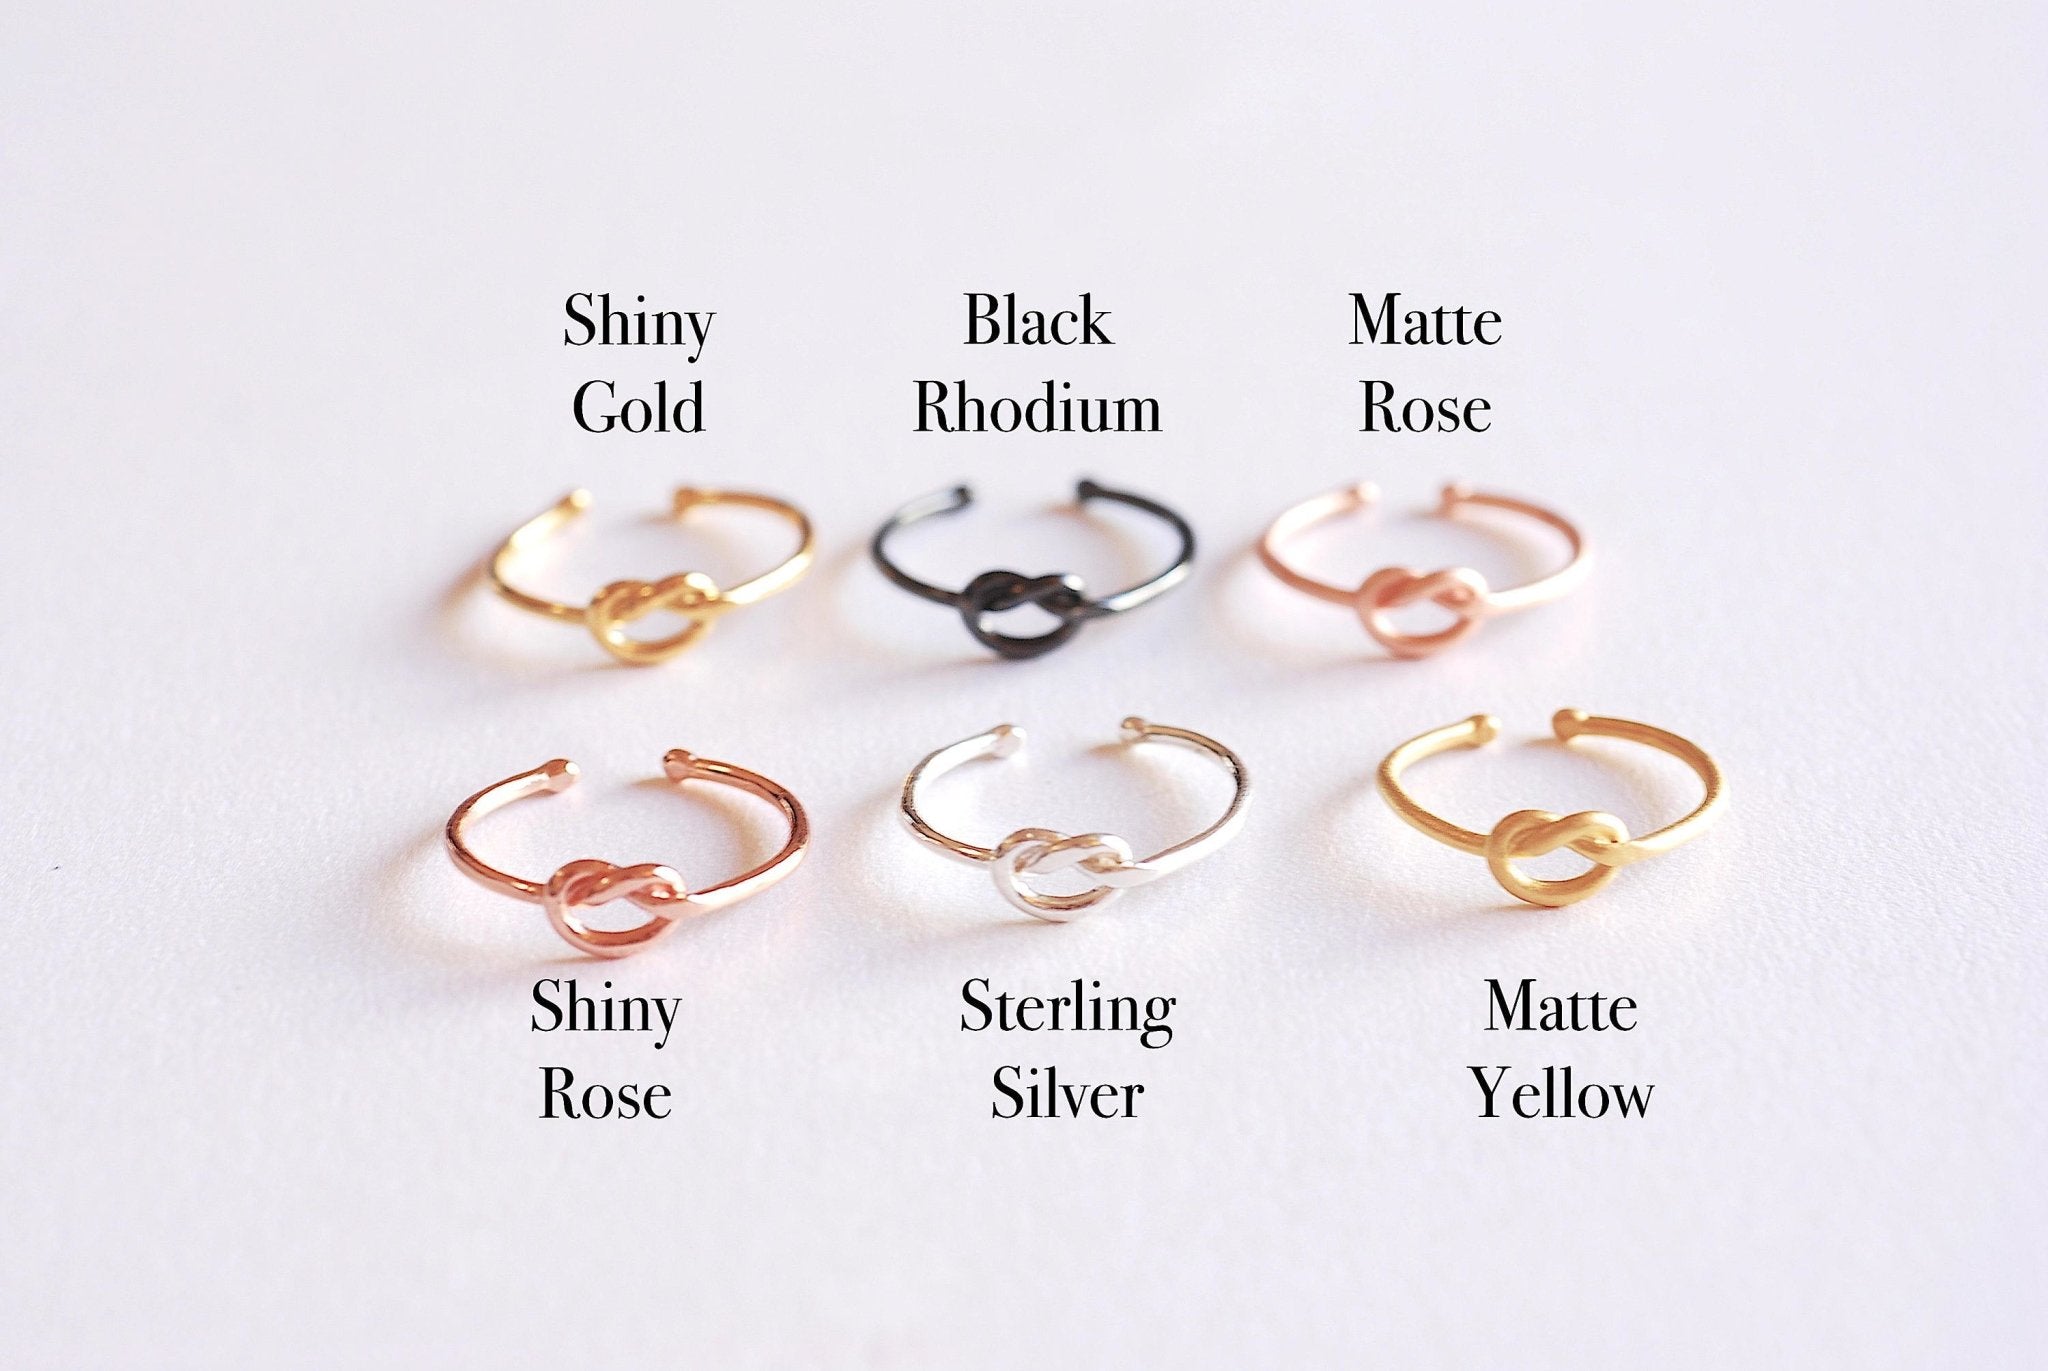 Shiny Pink Rose Gold Love Knot Ring- Love Knot adjustable ring, Thin Love knot ring, bridesmaid Gift, Infinity Ring, Eternity Ring,Midi Ring - HarperCrown